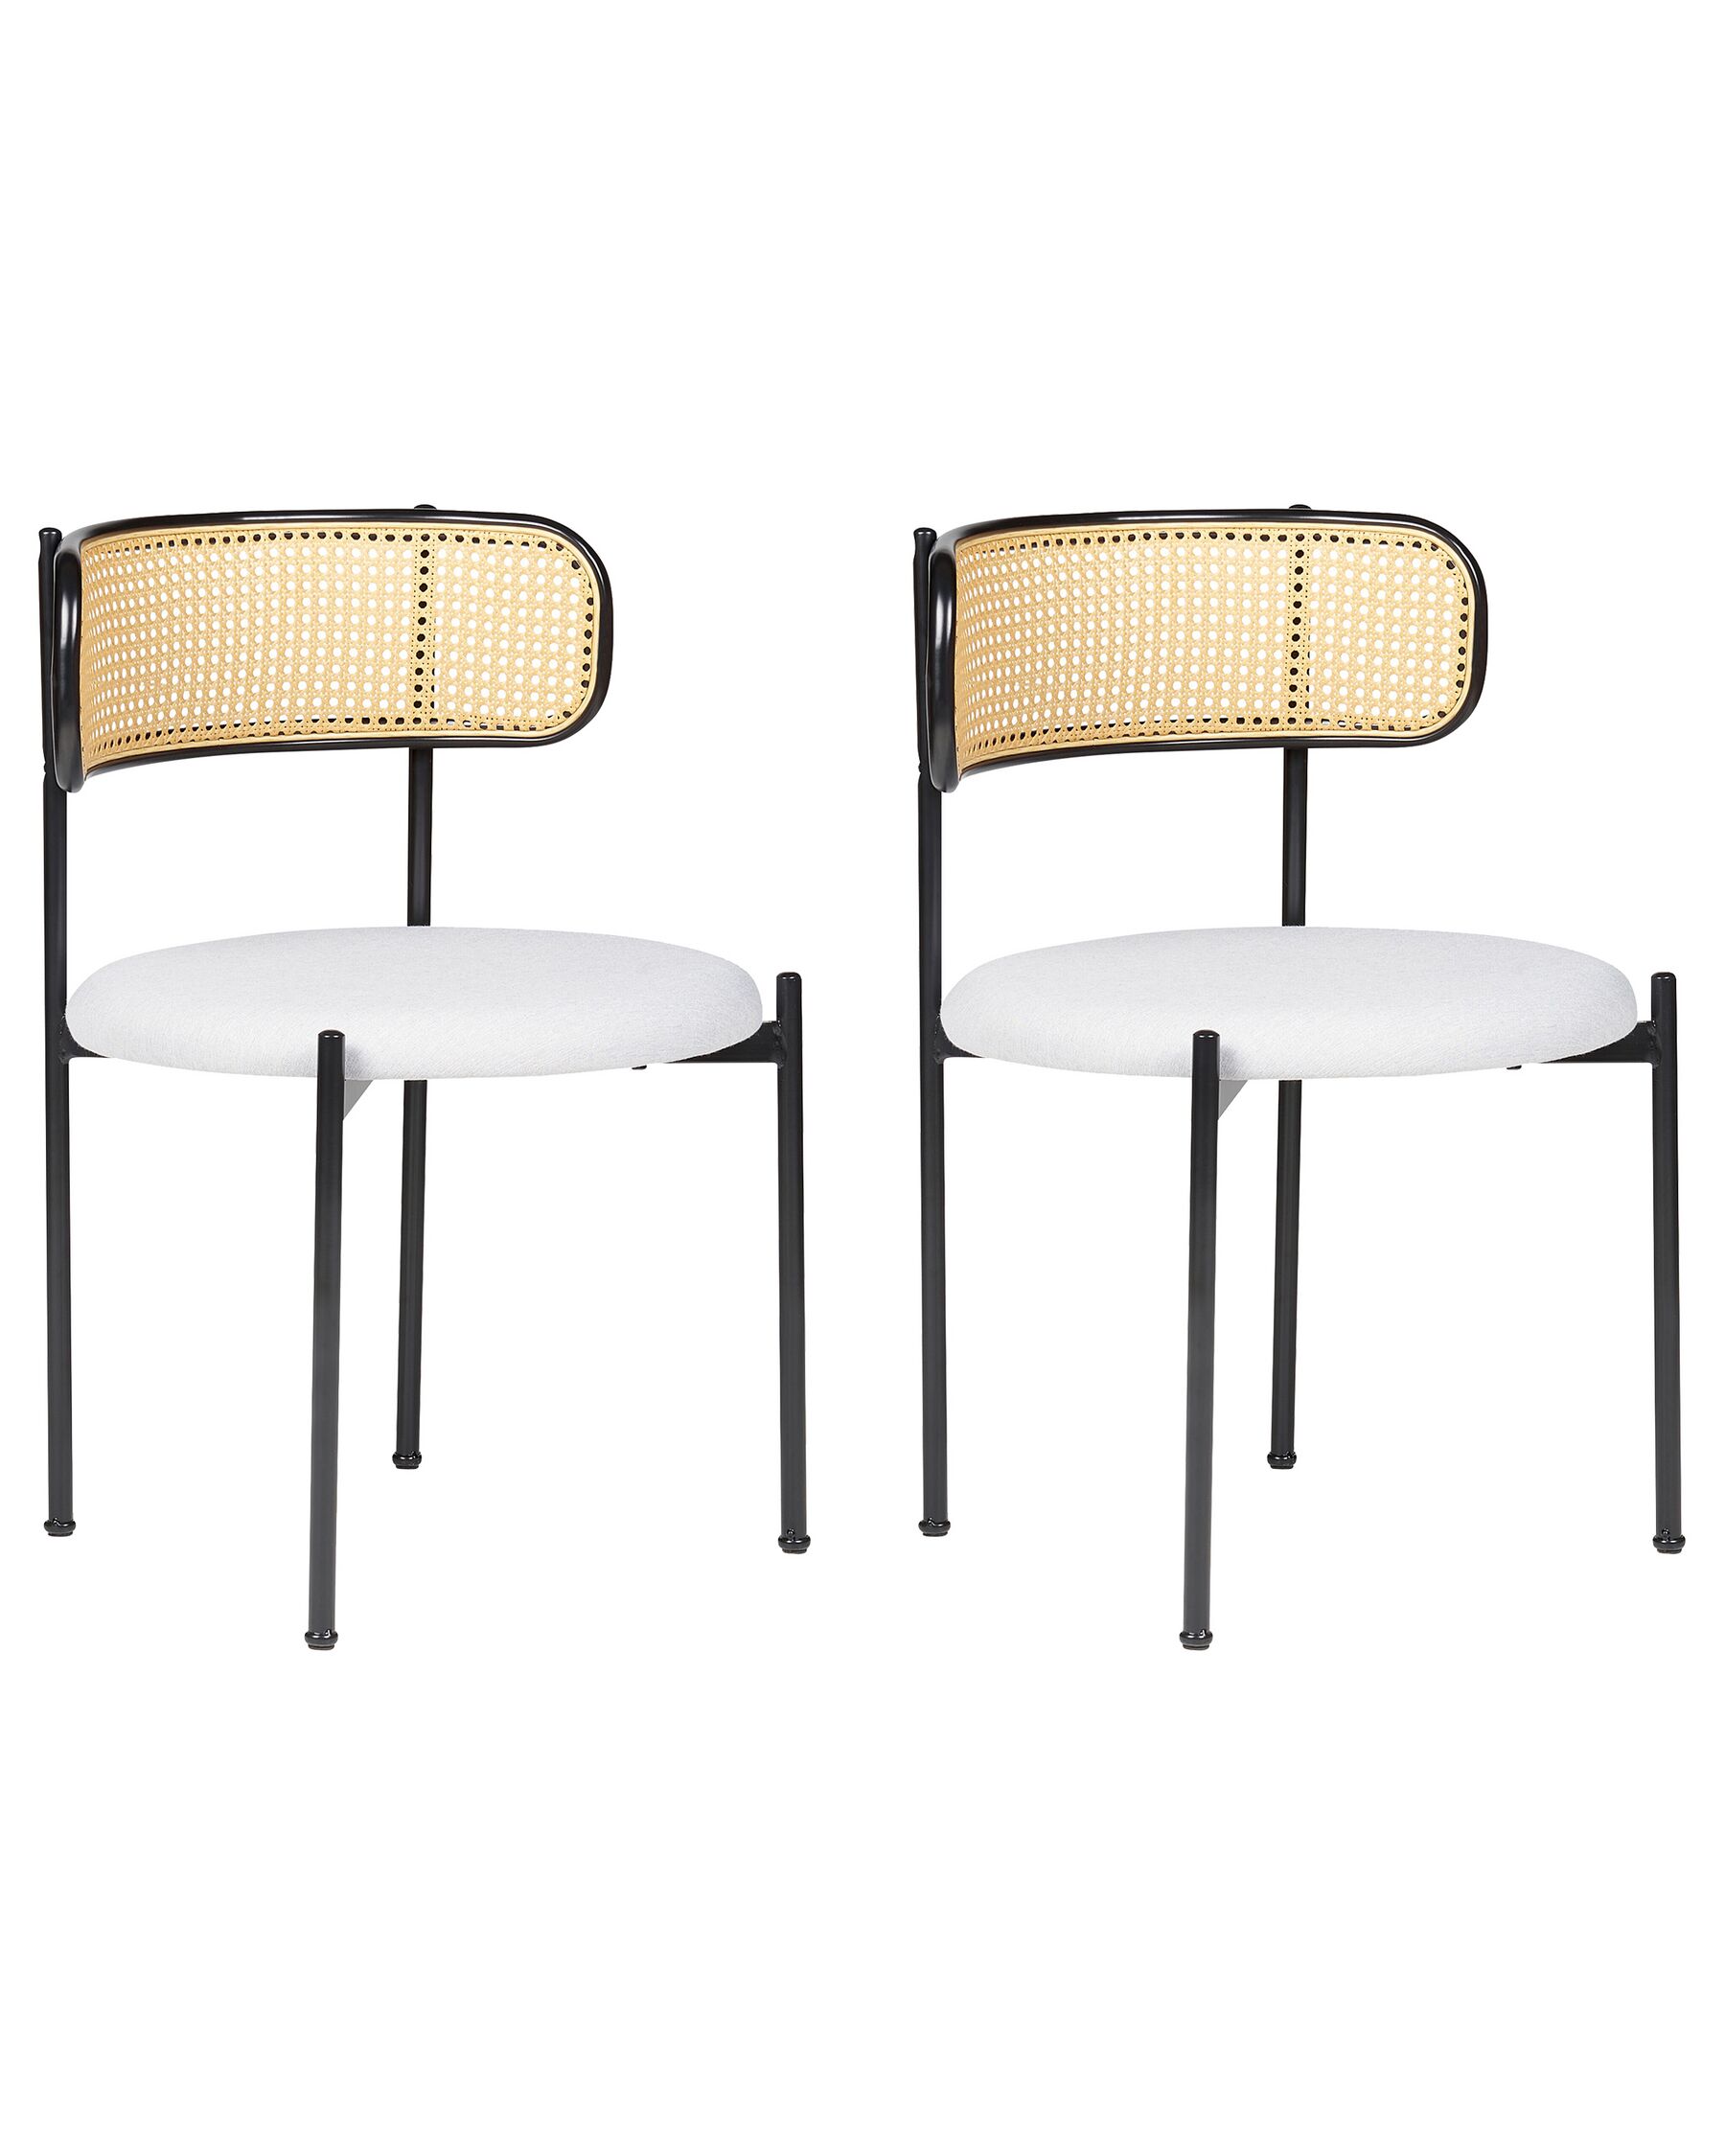 Set of 2 Metal Dining Chairs Black ANDOVER_888200